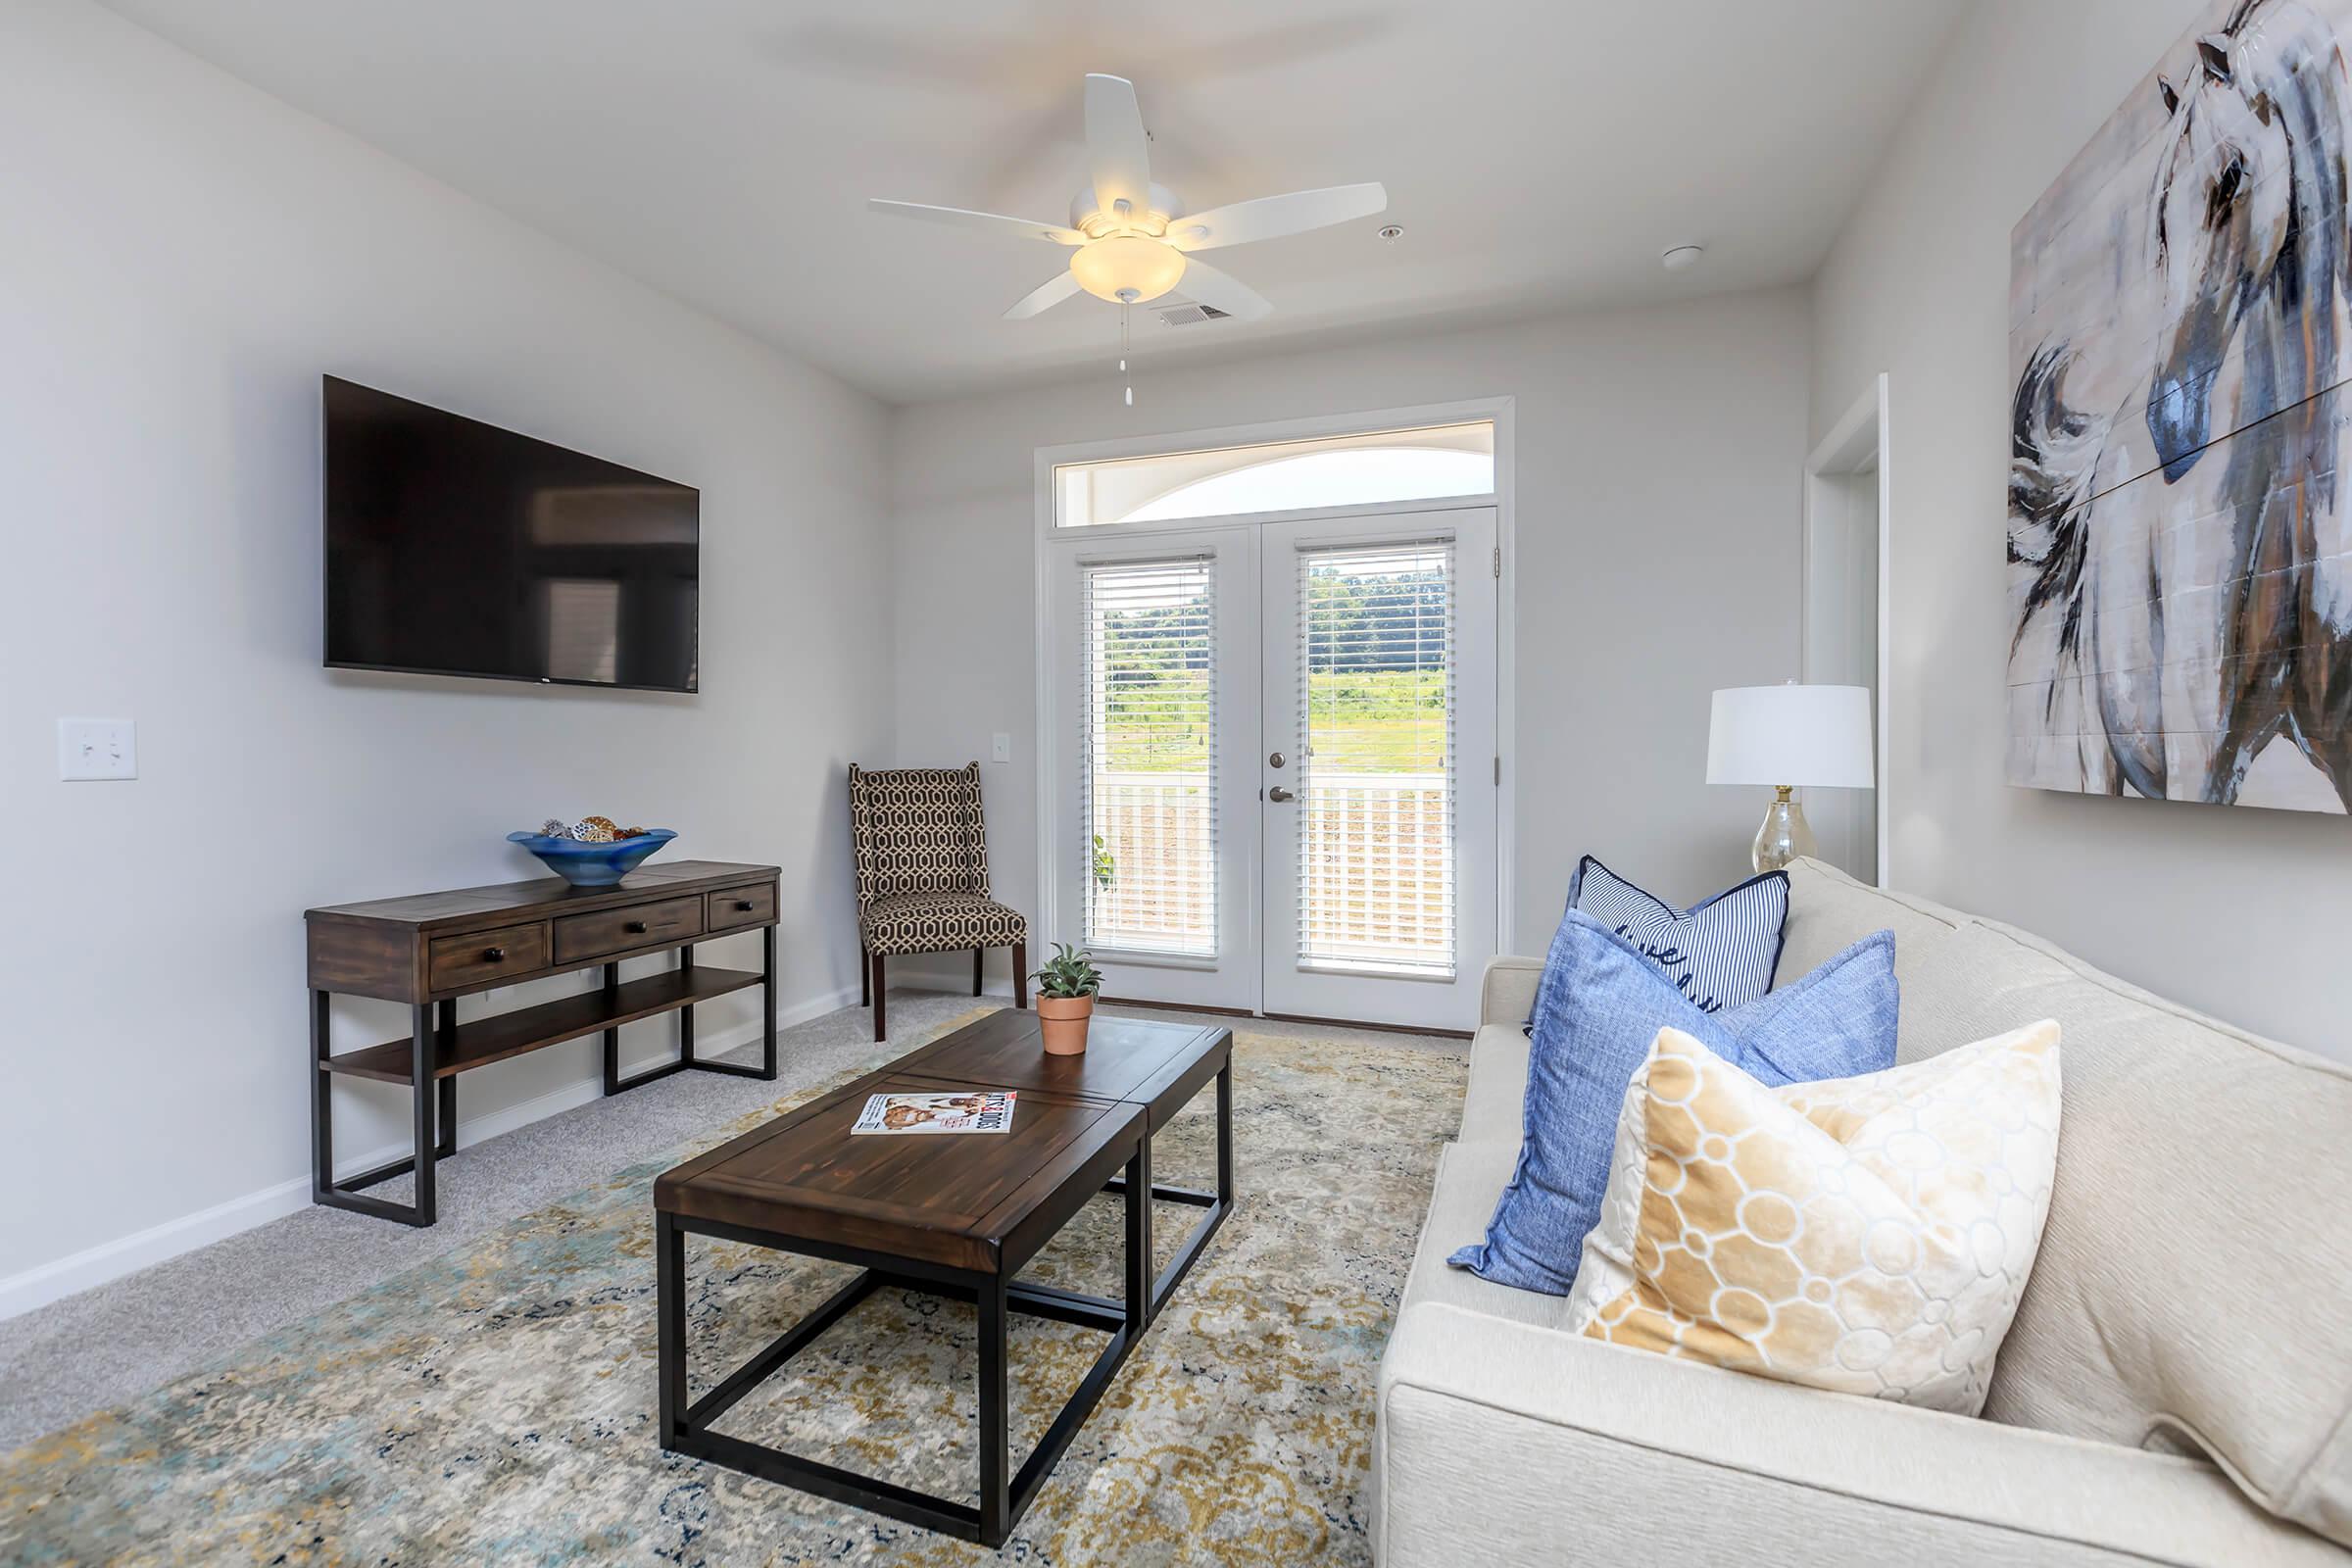 Enjoy The Sun From Your Balcony Or Patio At Riverstone Apartments At Long Shoals in Arden, NC